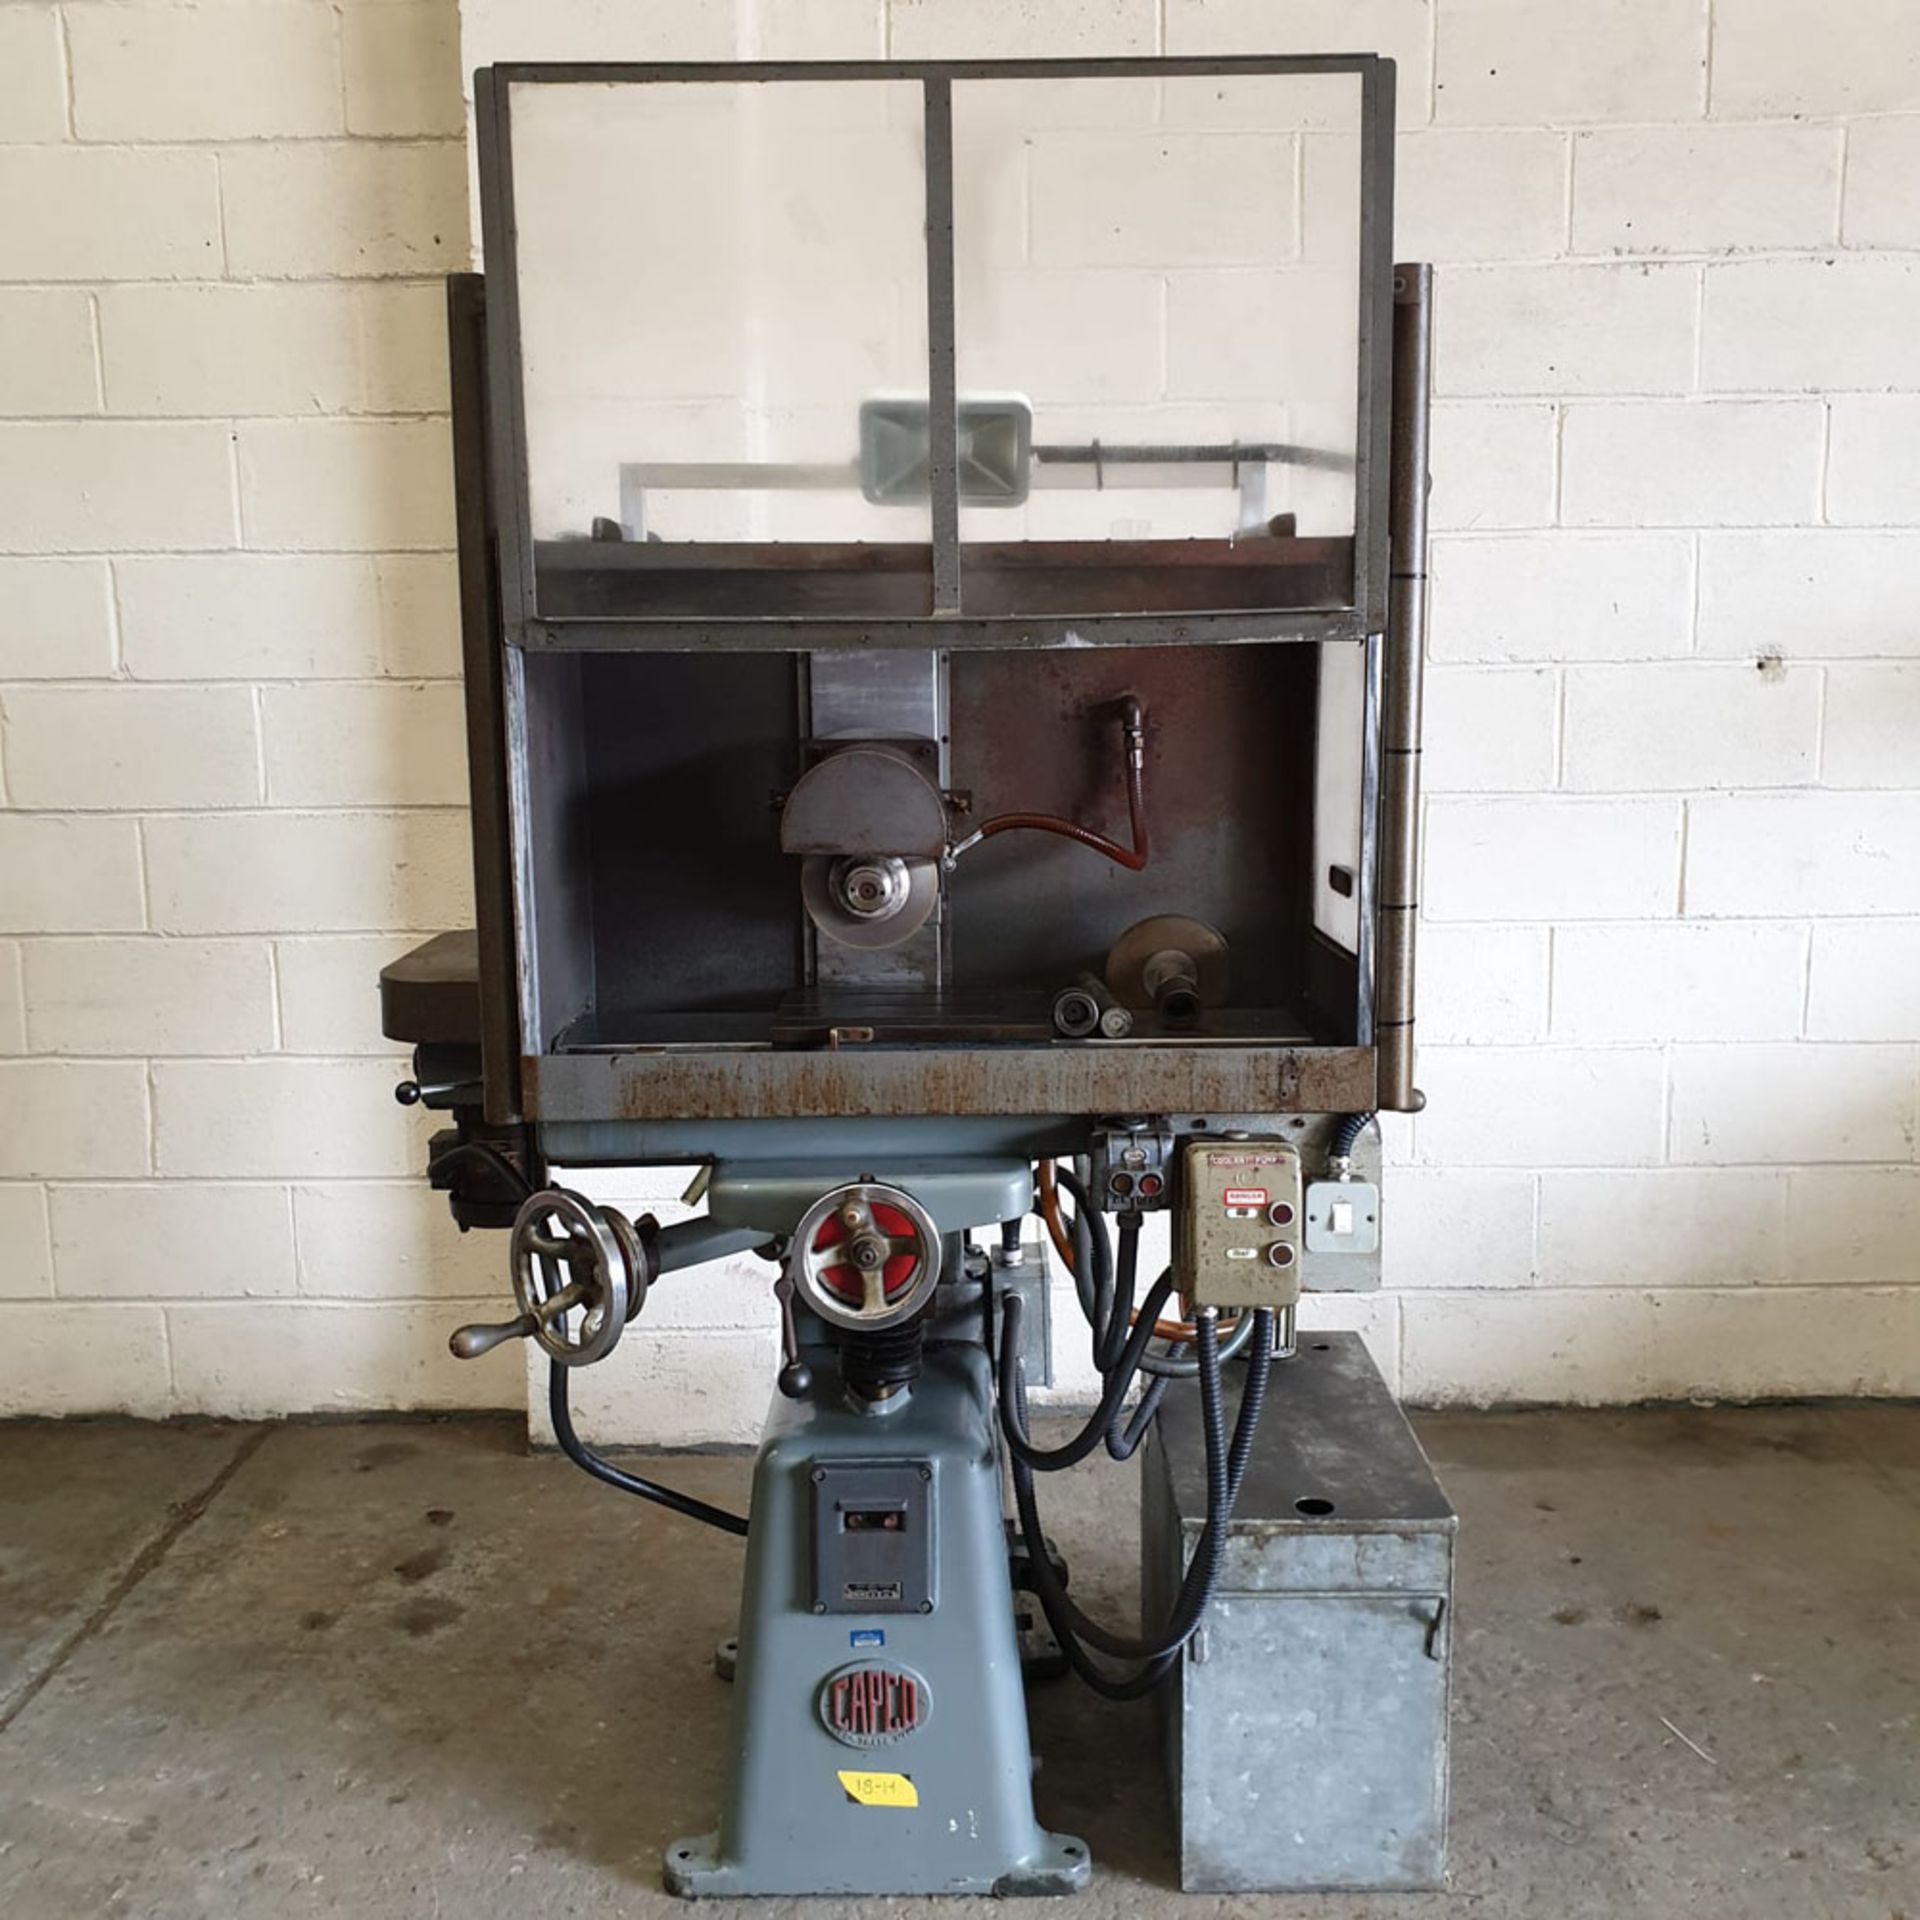 Capco MK2 Model No.3 Surface Grinding Machine. Table Size 18" x 6". Power To Table. - Image 2 of 8